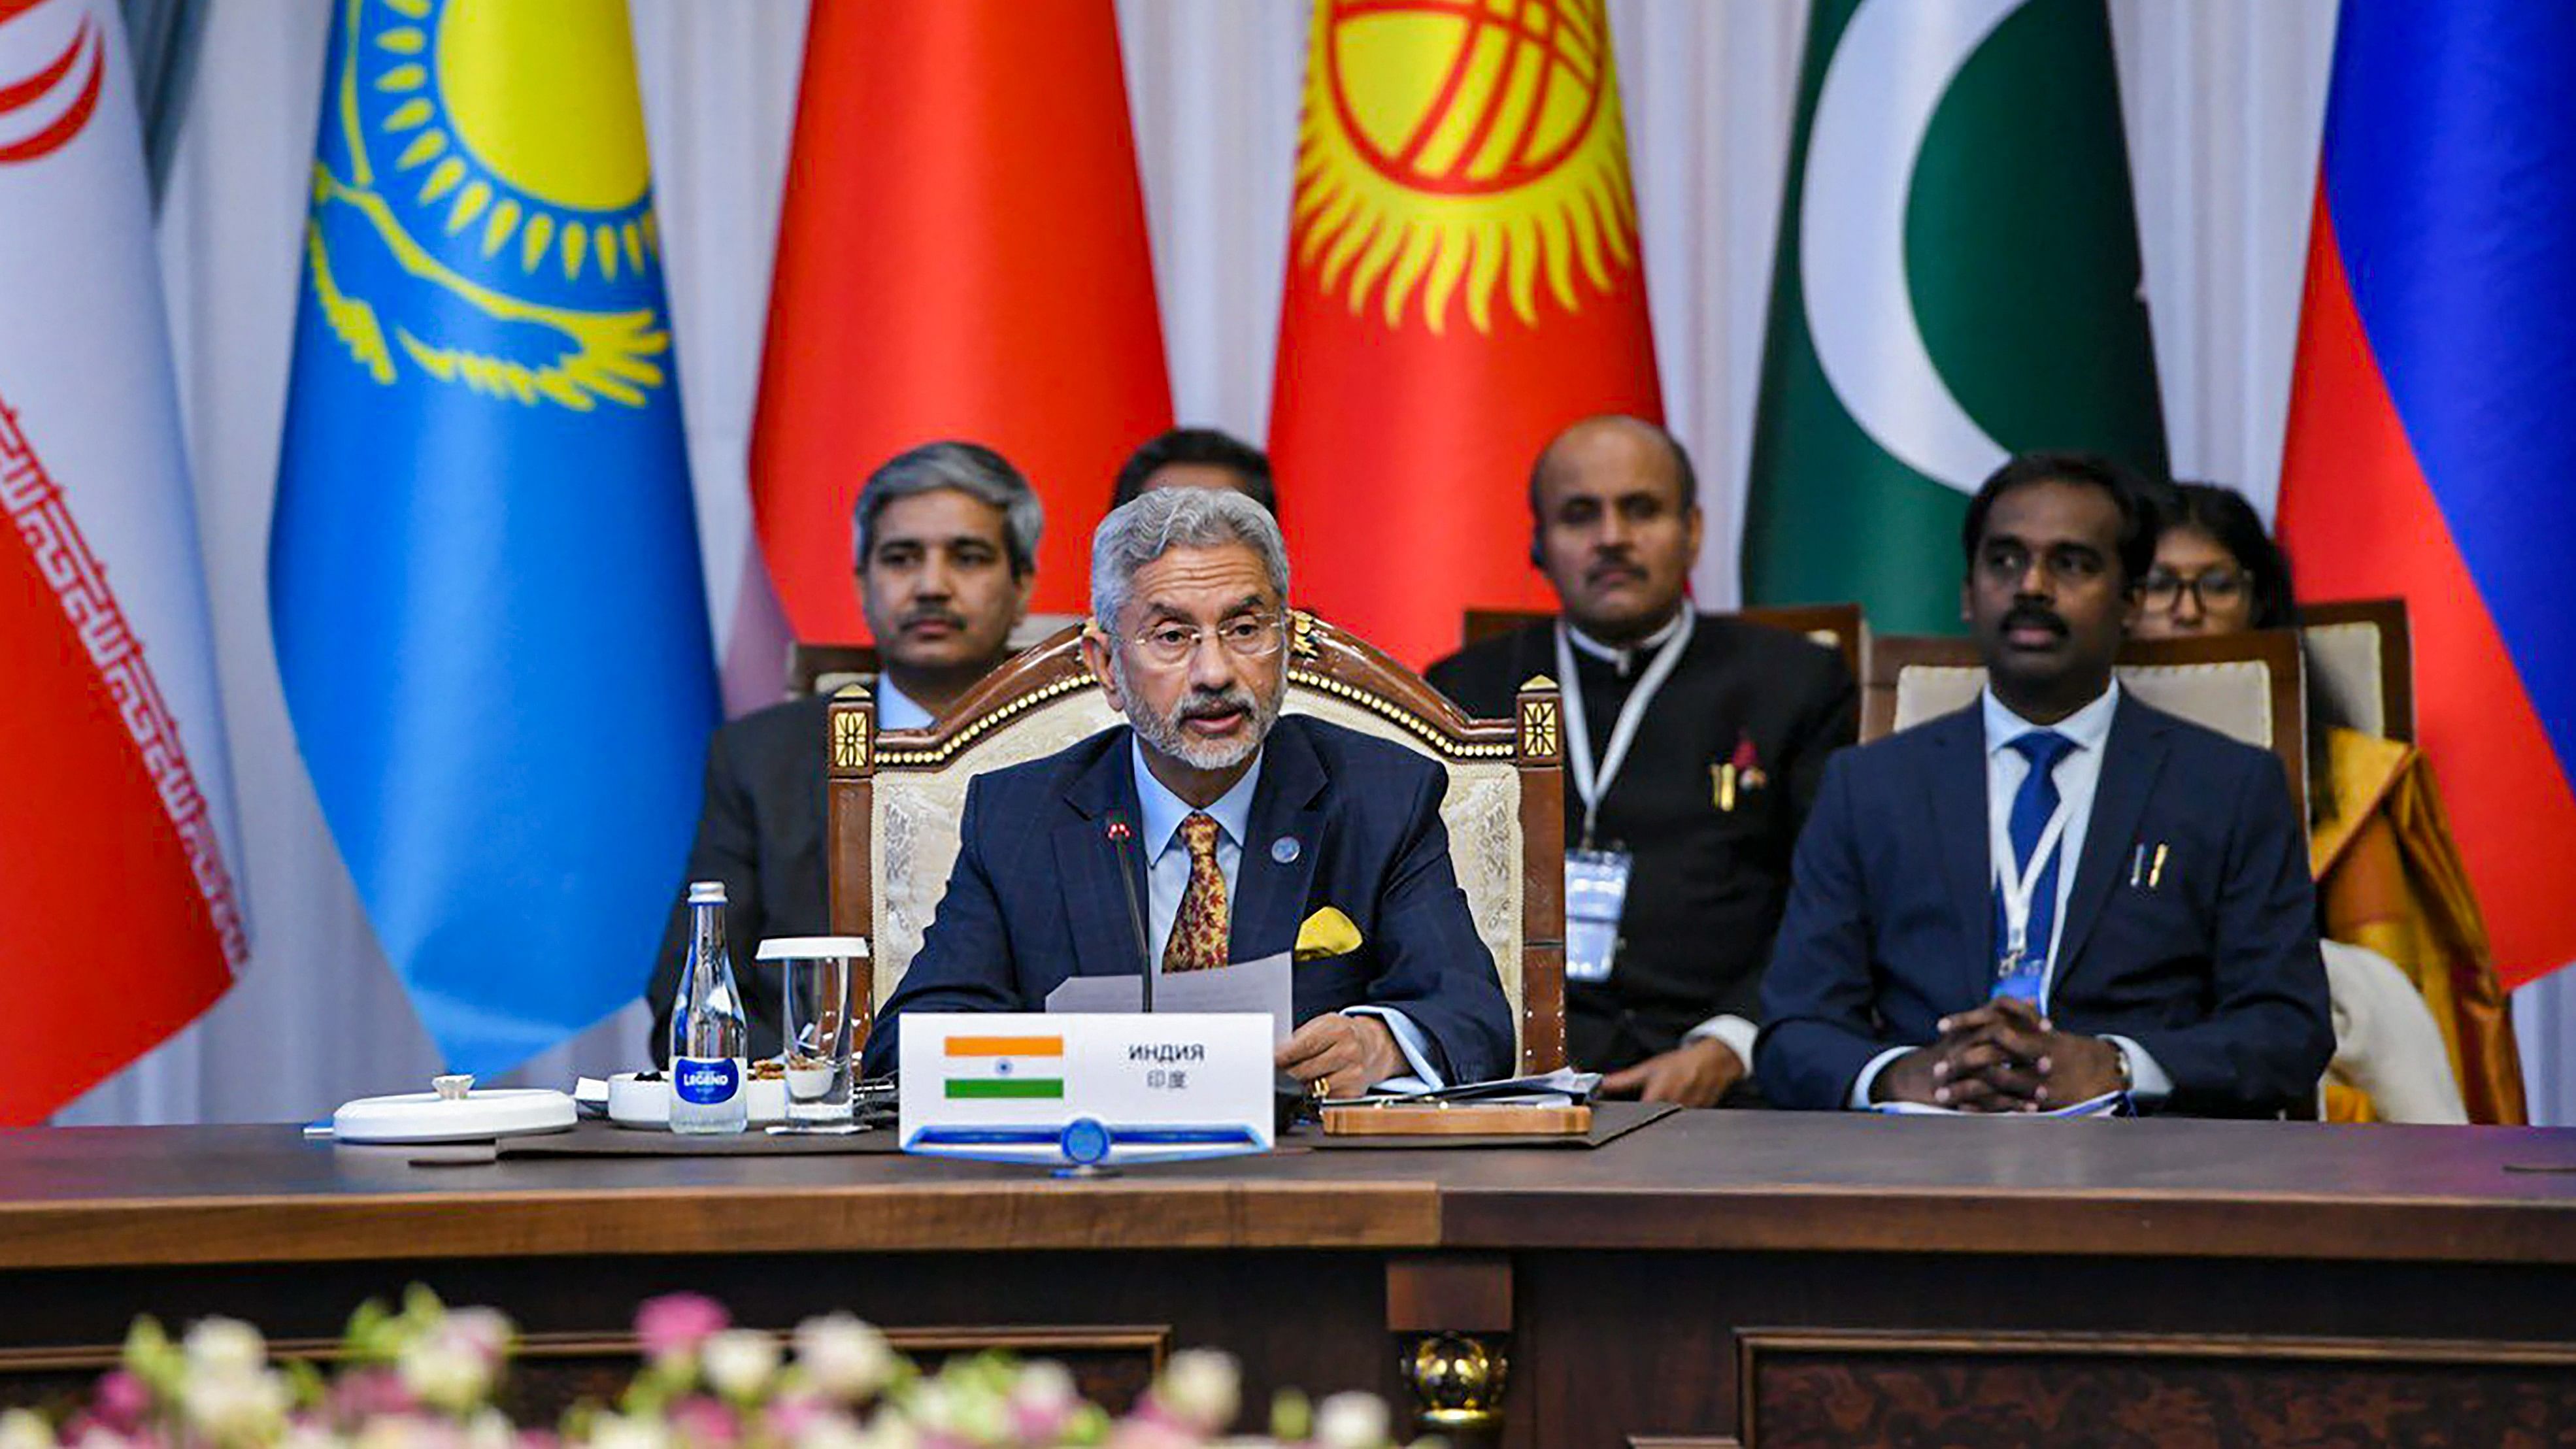 <div class="paragraphs"><p>External Affairs Minister S Jaishankar addresses the 22nd session of the Council of Heads of Government of SCO, in Bishkek, Kyrgyzstan.</p></div>